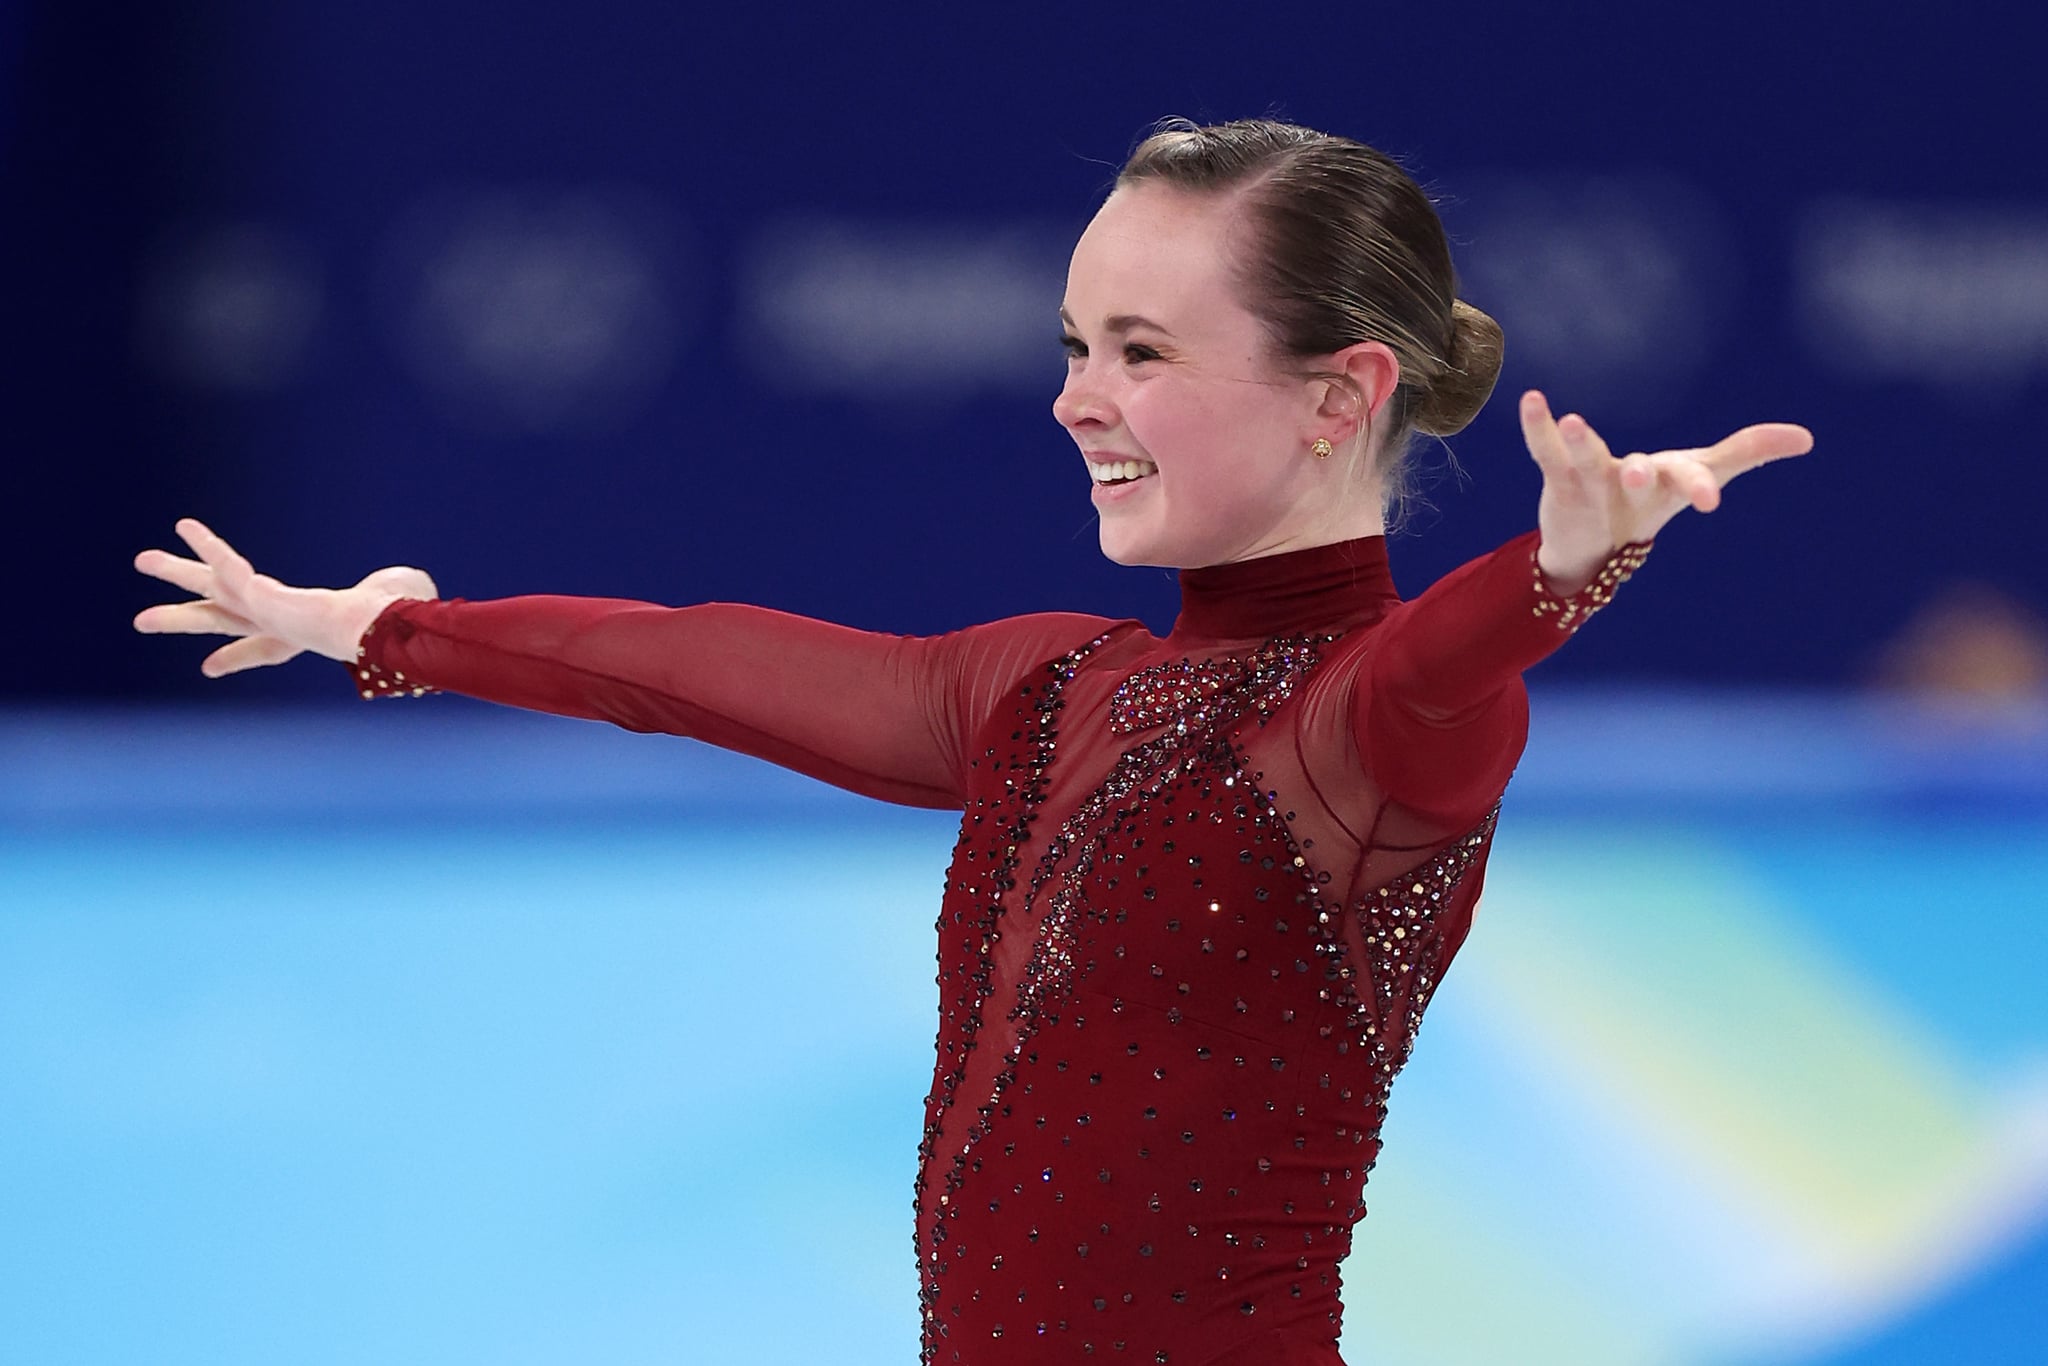 BEIJING, CHINA - FEBRUARY 17: Mariah Bell of Team United States reacts after skating during the Women Single Skating Free Skating on day thirteen of the Beijing 2022 Winter Olympic Games at Capital Indoor Stadium on February 17, 2022 in Beijing, China. (Photo by Matthew Stockman/Getty Images)